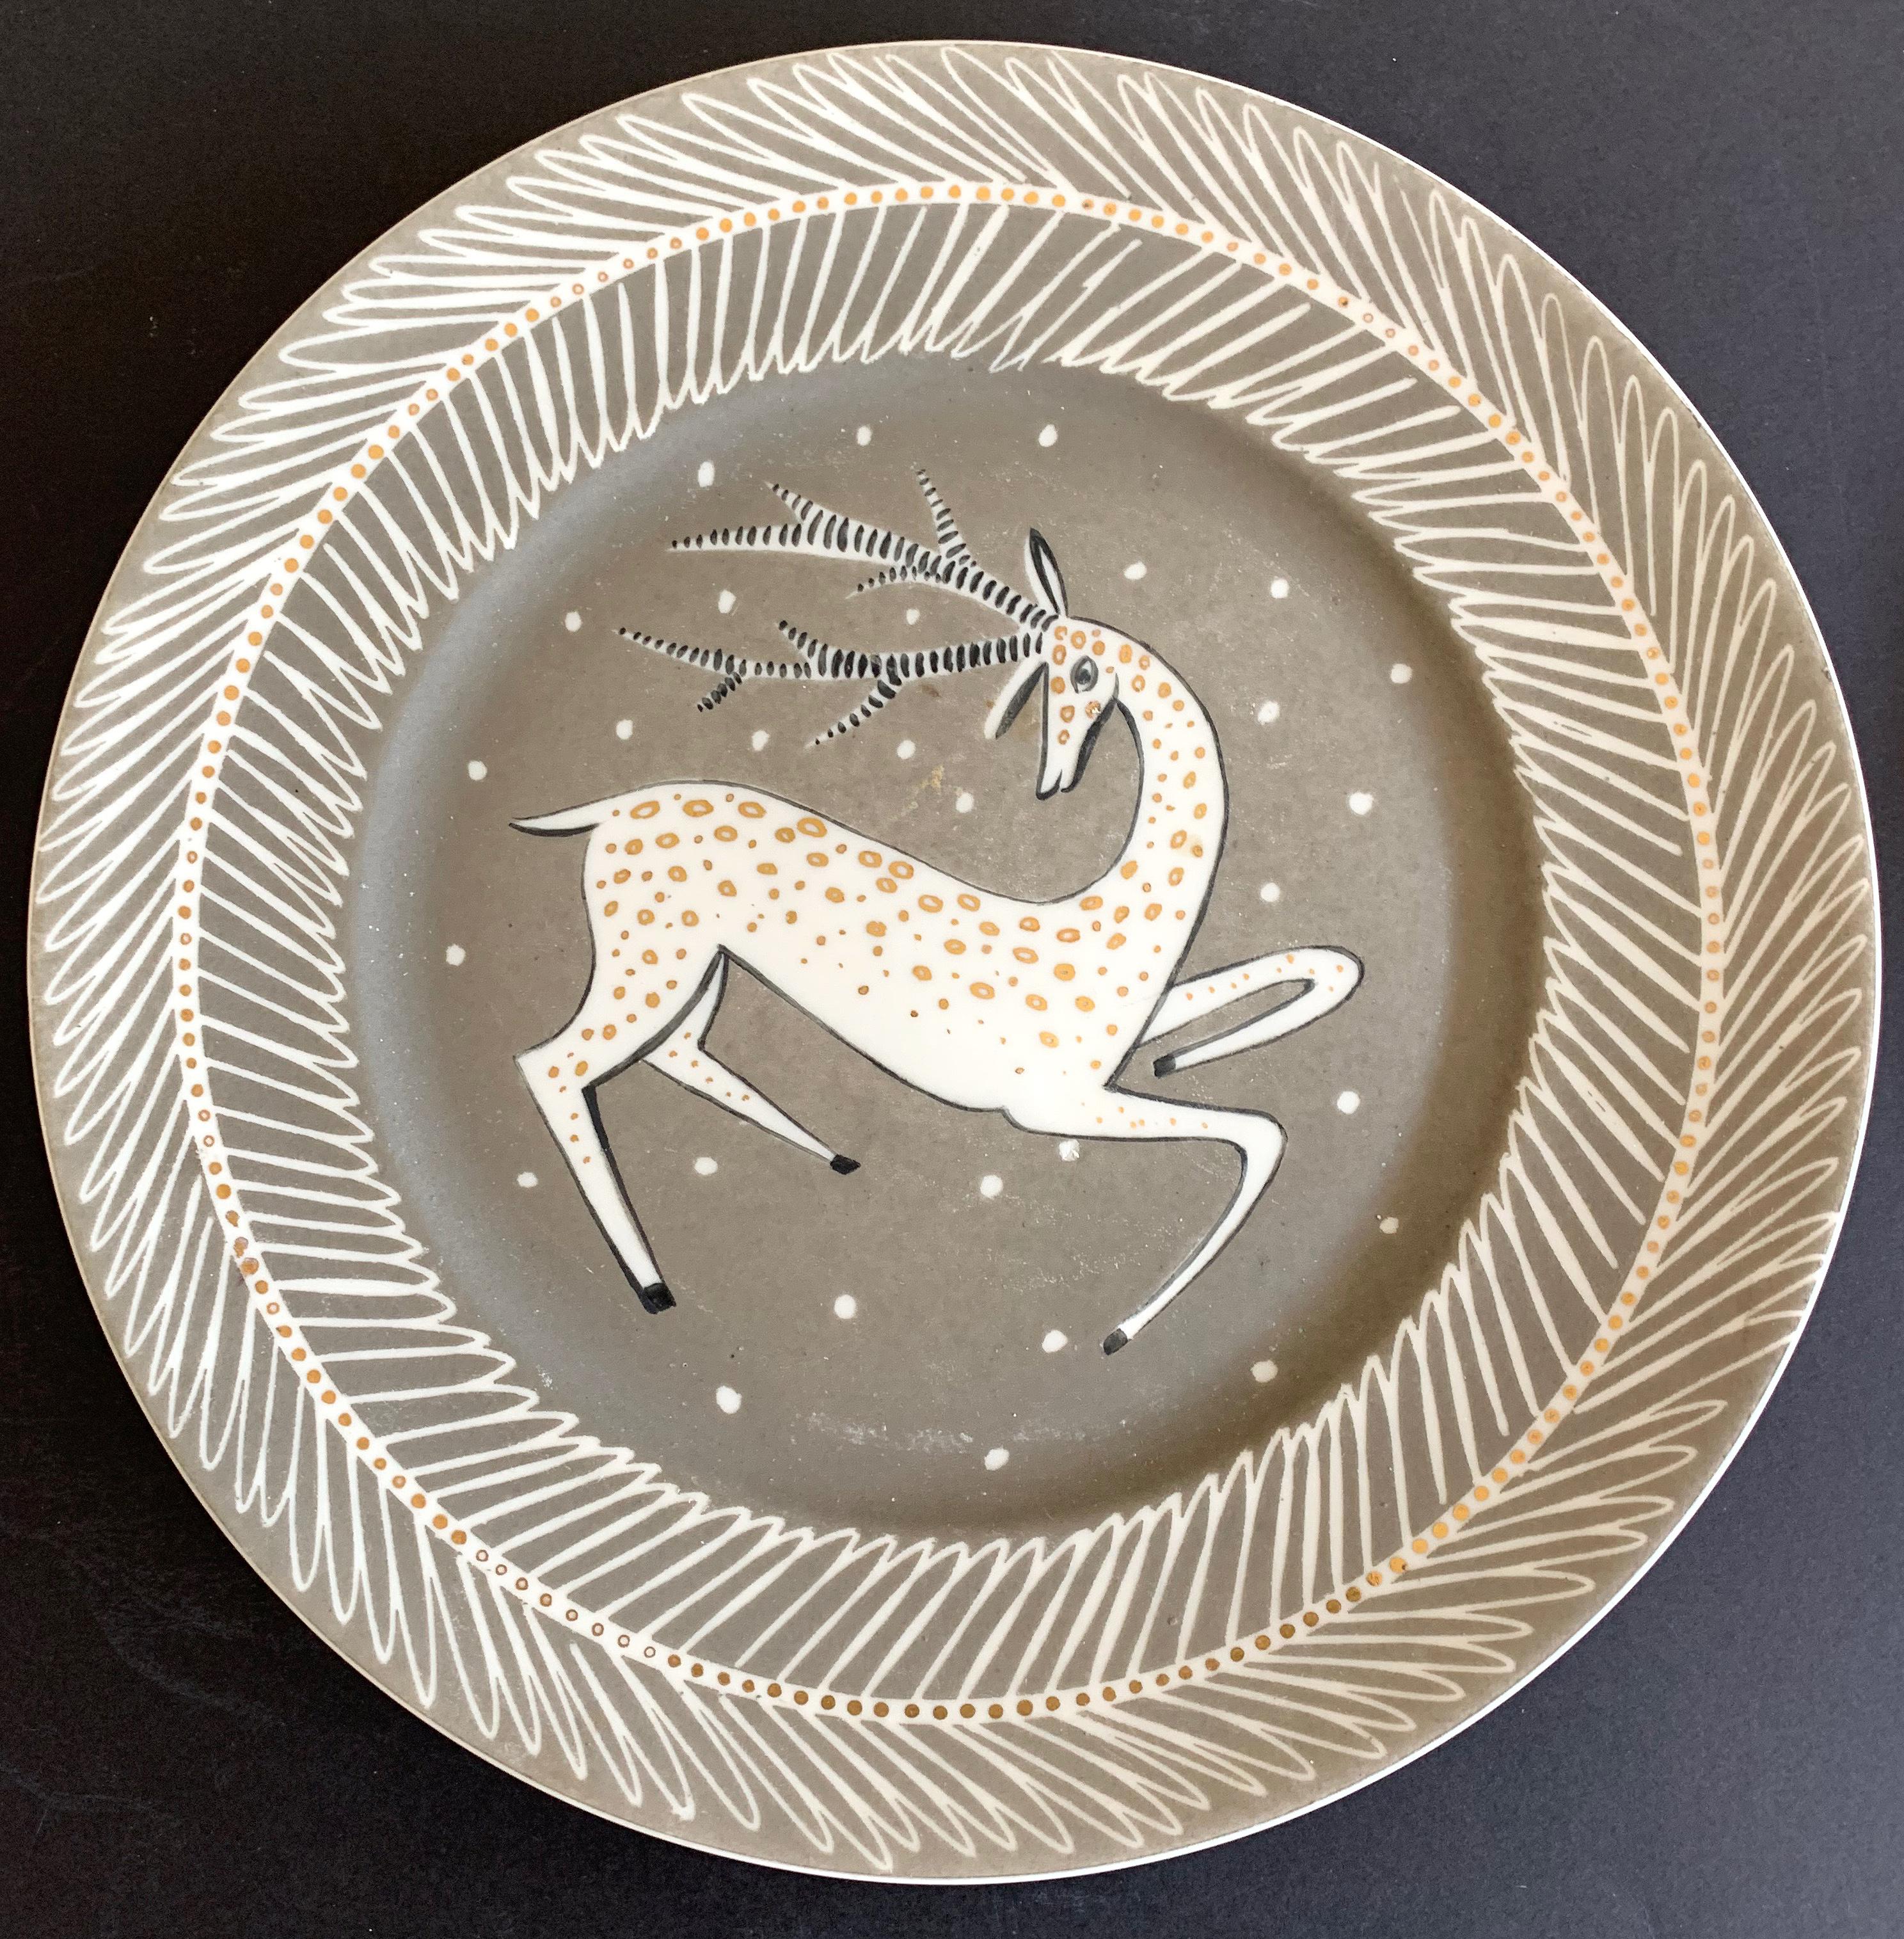 Gorgeously glazed in tones of warm grey (almost taupe), white and mirrored gold, this rare and stunning pair of plates depict leaping gazelles, a favorite motif of artists in the Art Deco era. The artist was Waylande Gregory, who was prodigious and